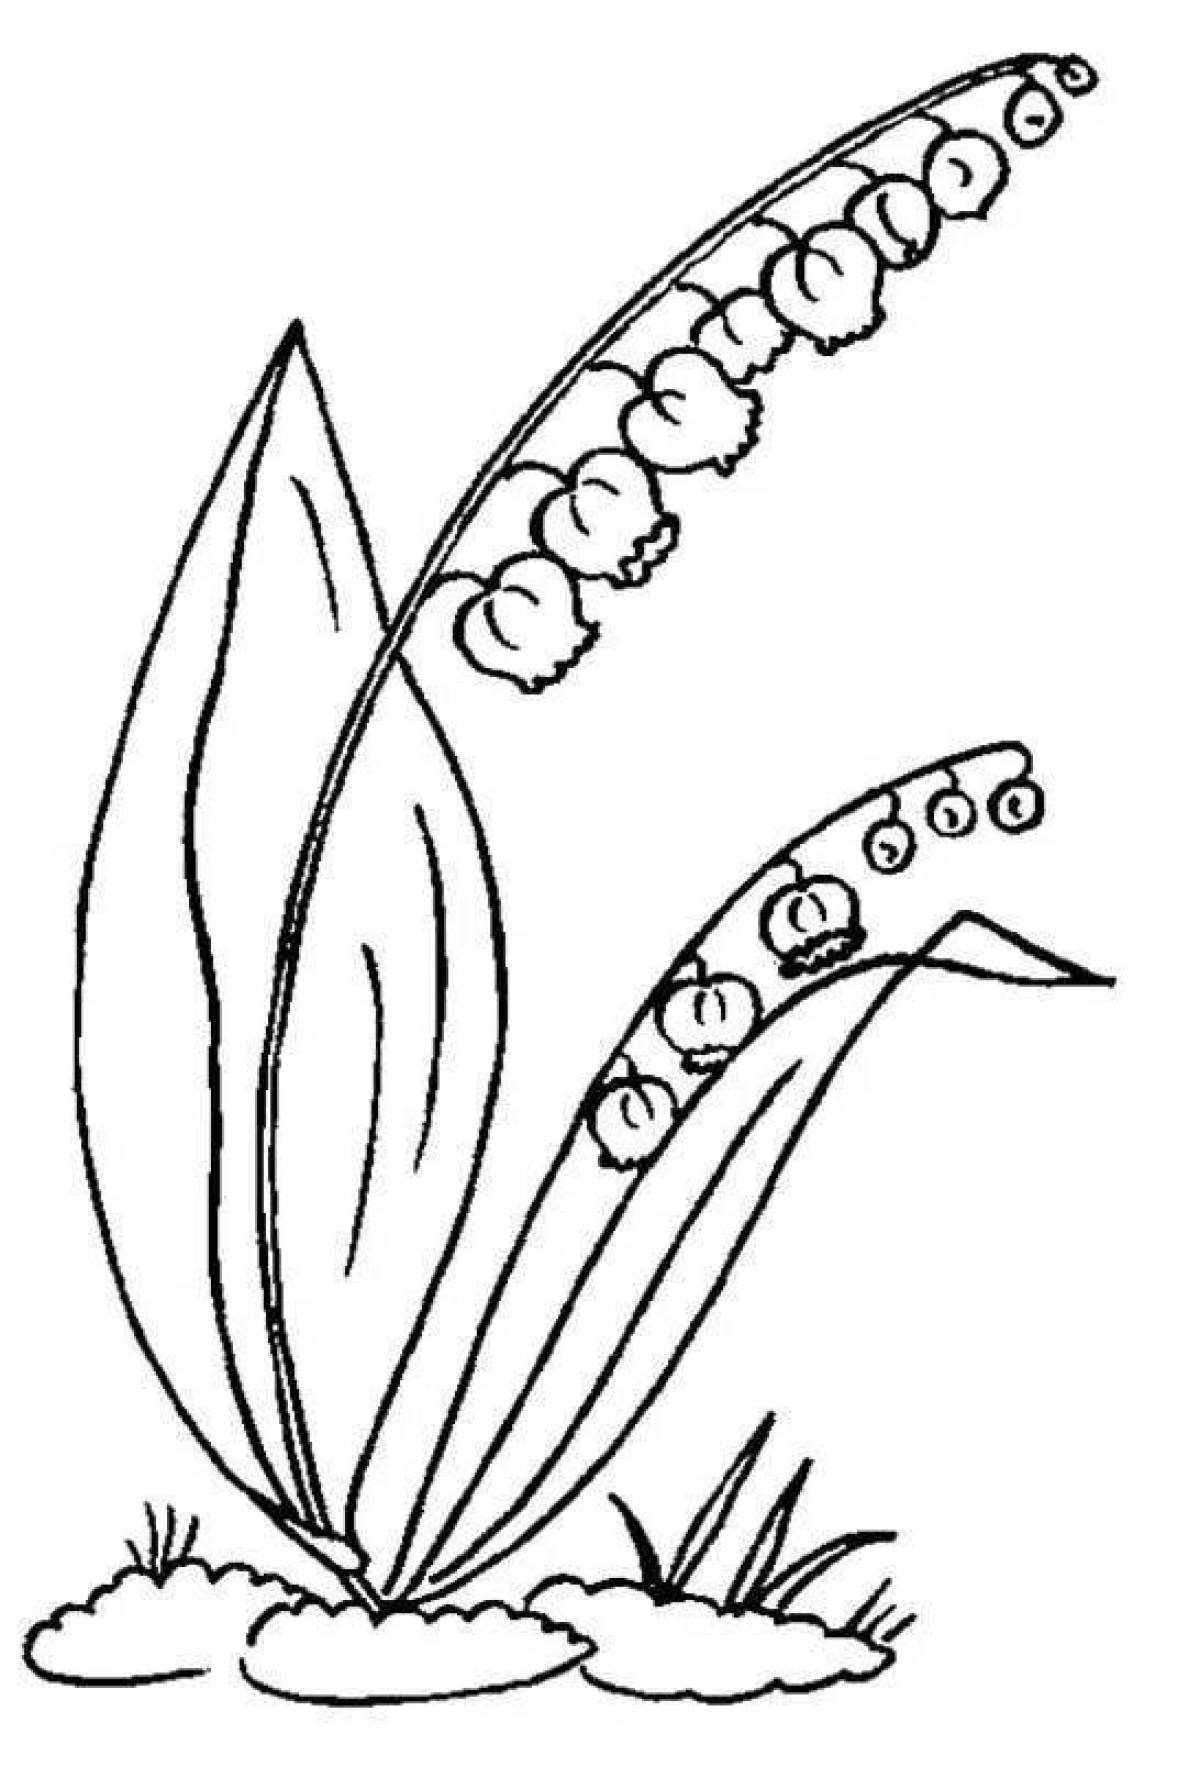 Amazing lily of the valley coloring book for kids